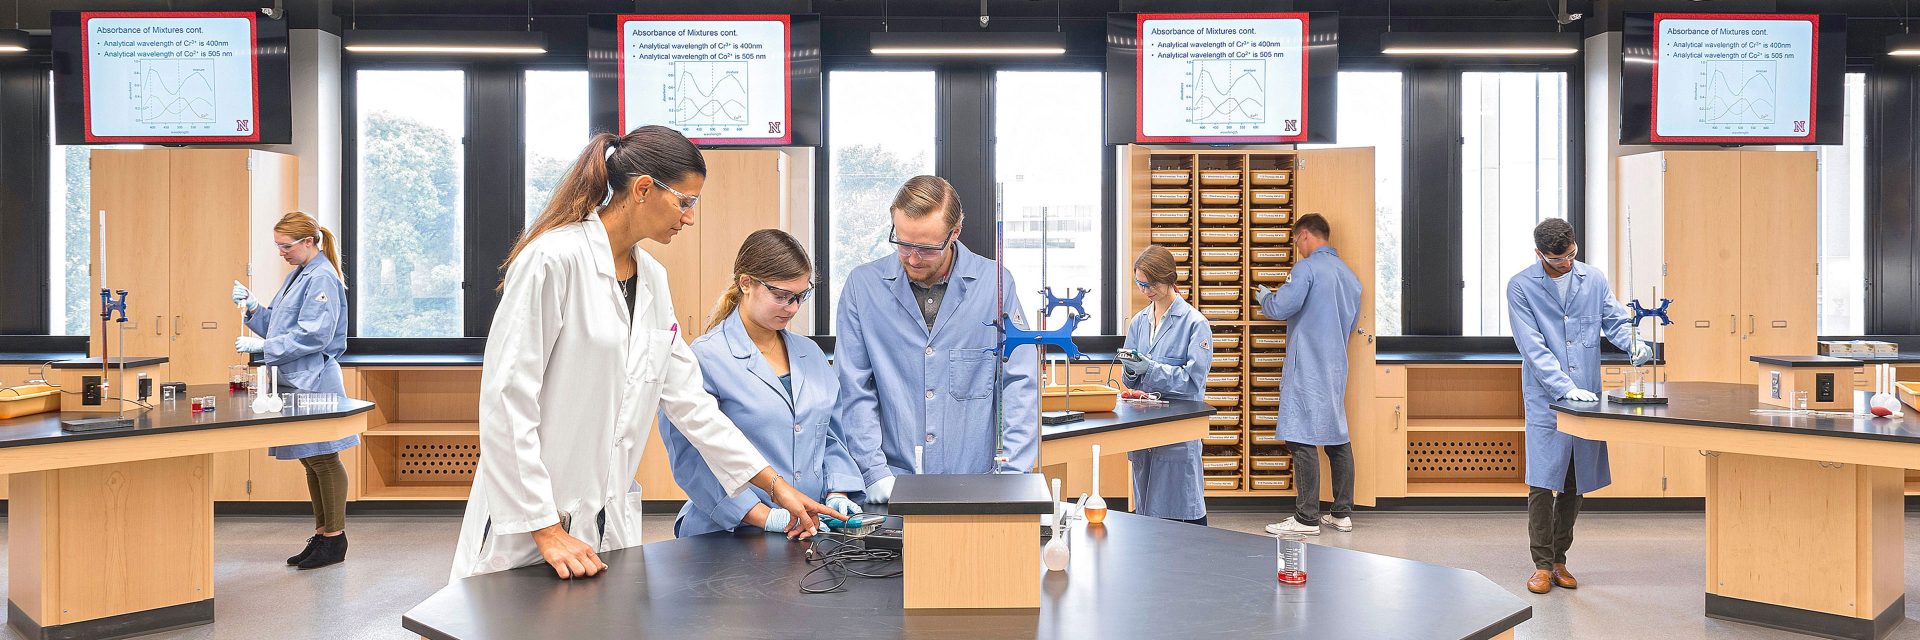 Chemistry professor demonstrating use of equipment to two students in a modern teaching laboratory